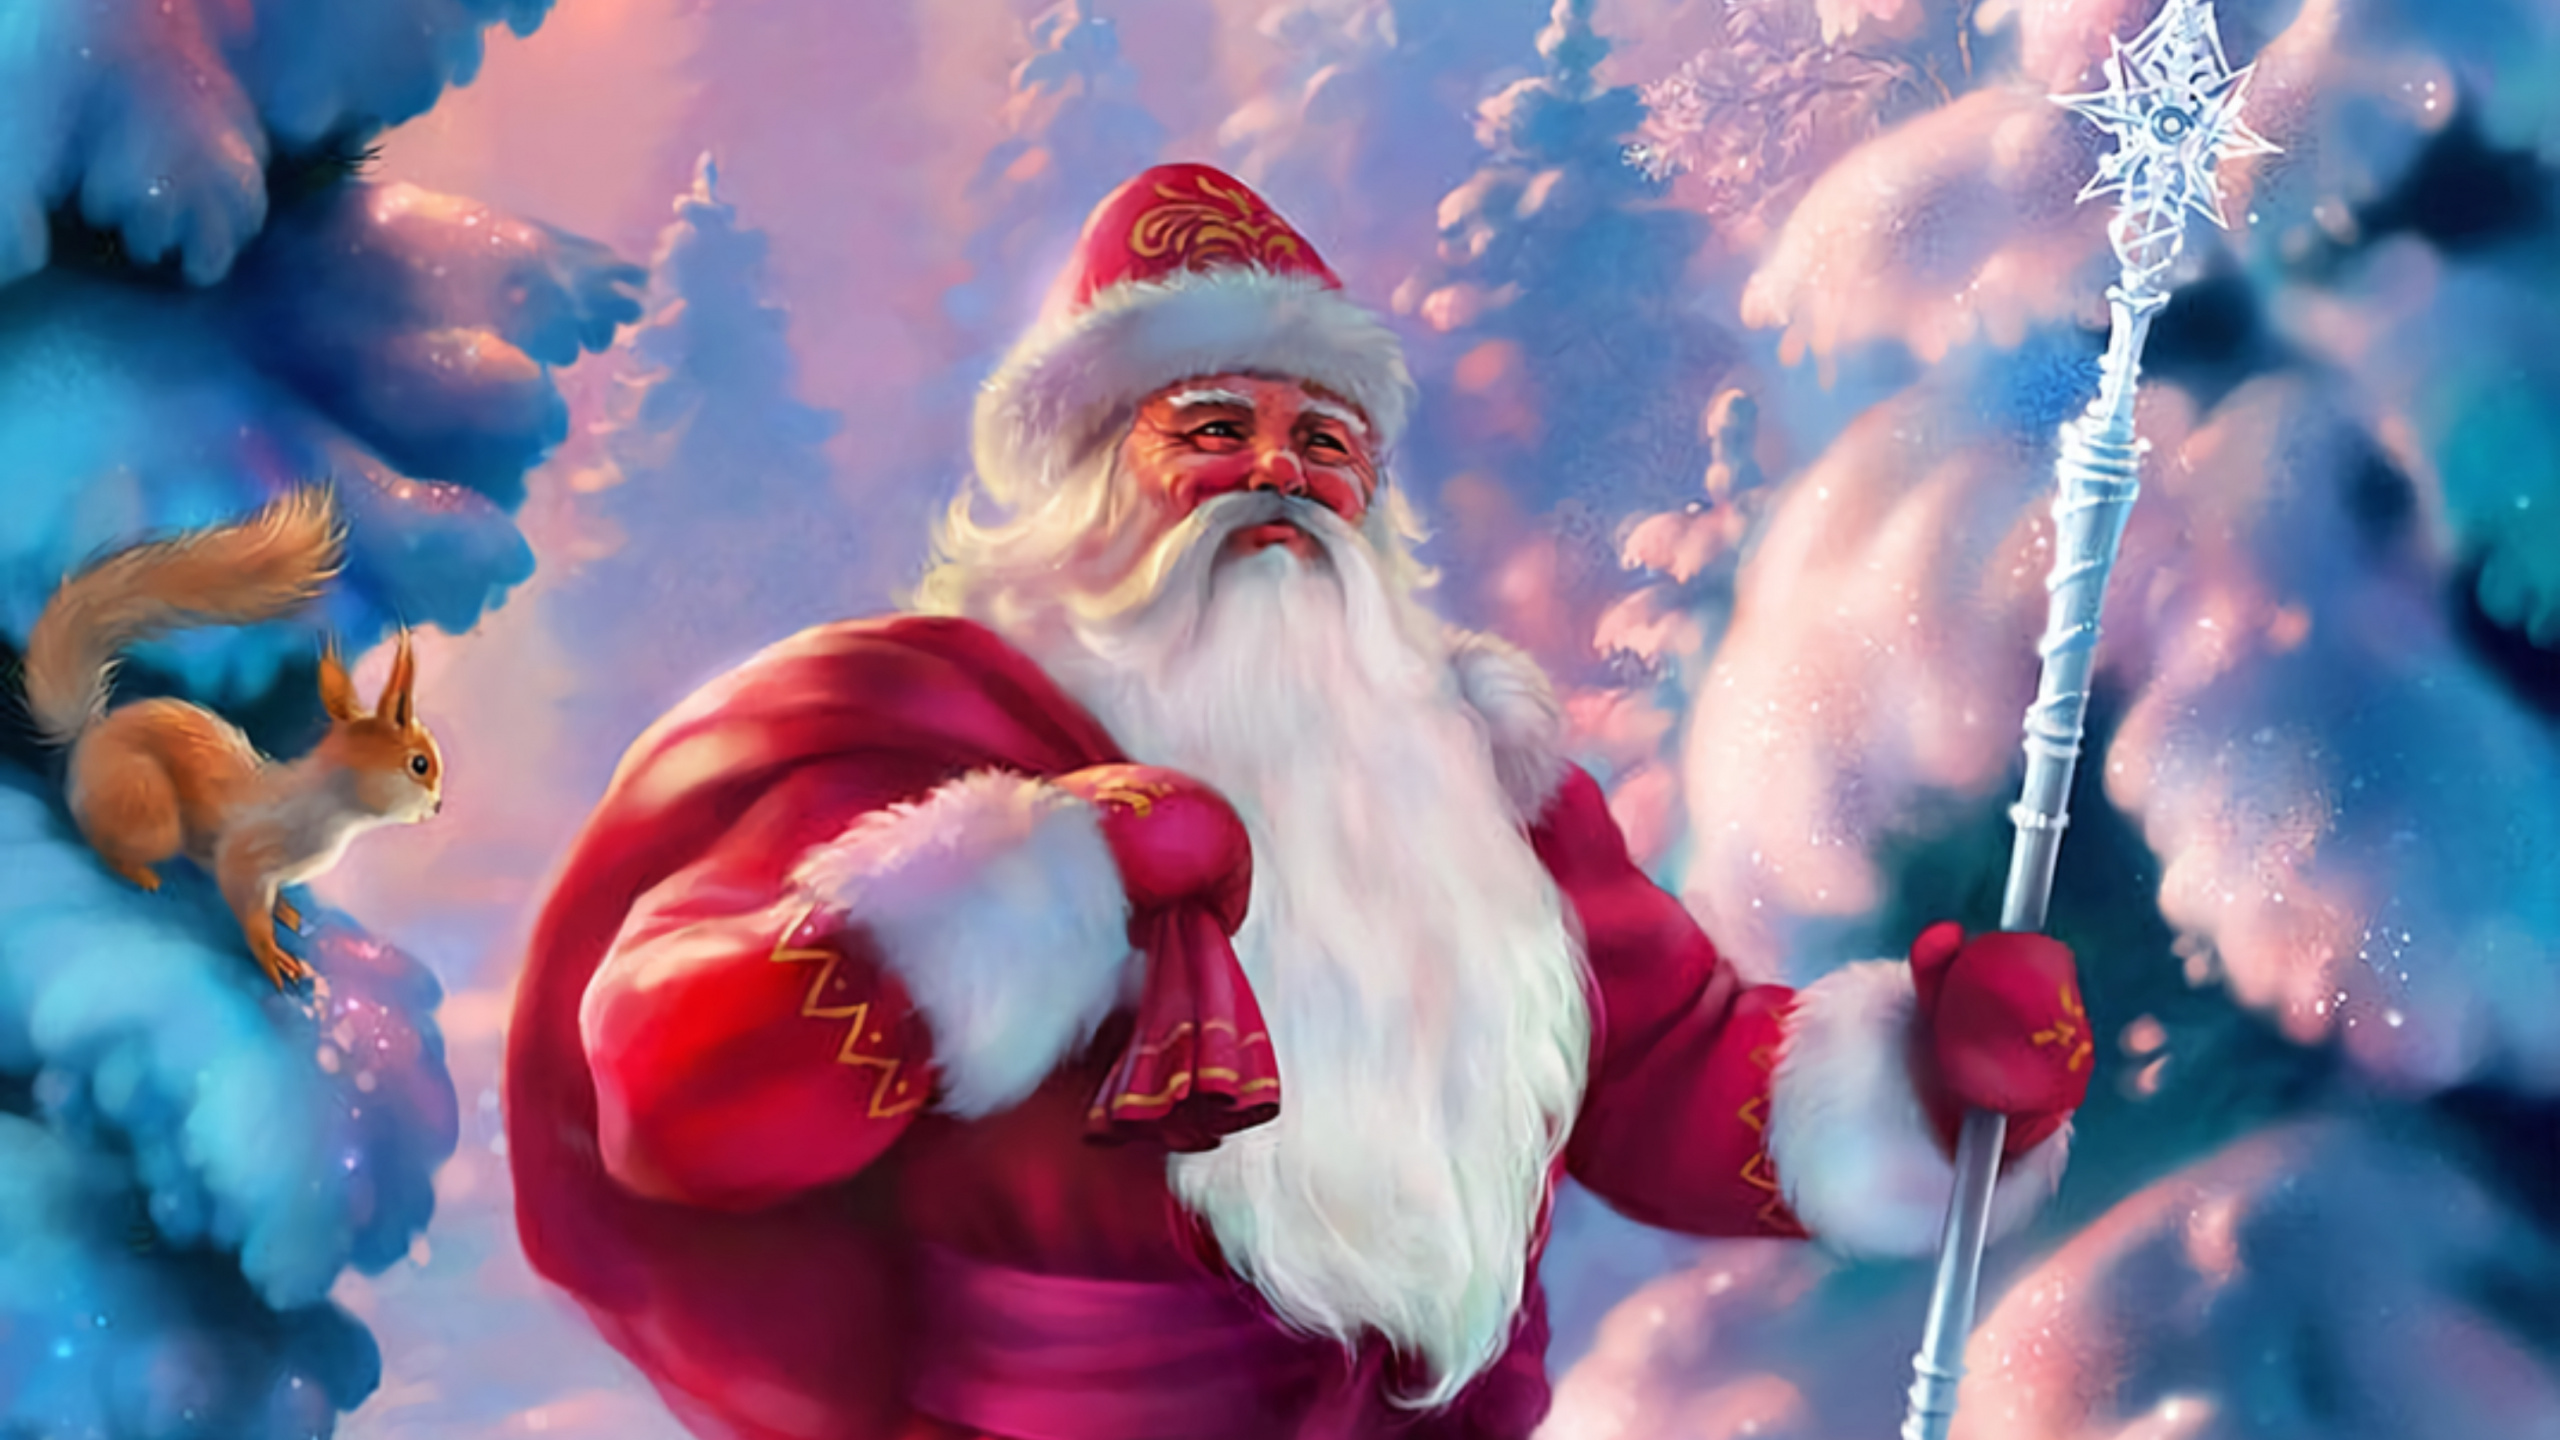 Santa Claus, Ded Moroz, Christmas Day, Christmas, Animation. Wallpaper in 2560x1440 Resolution